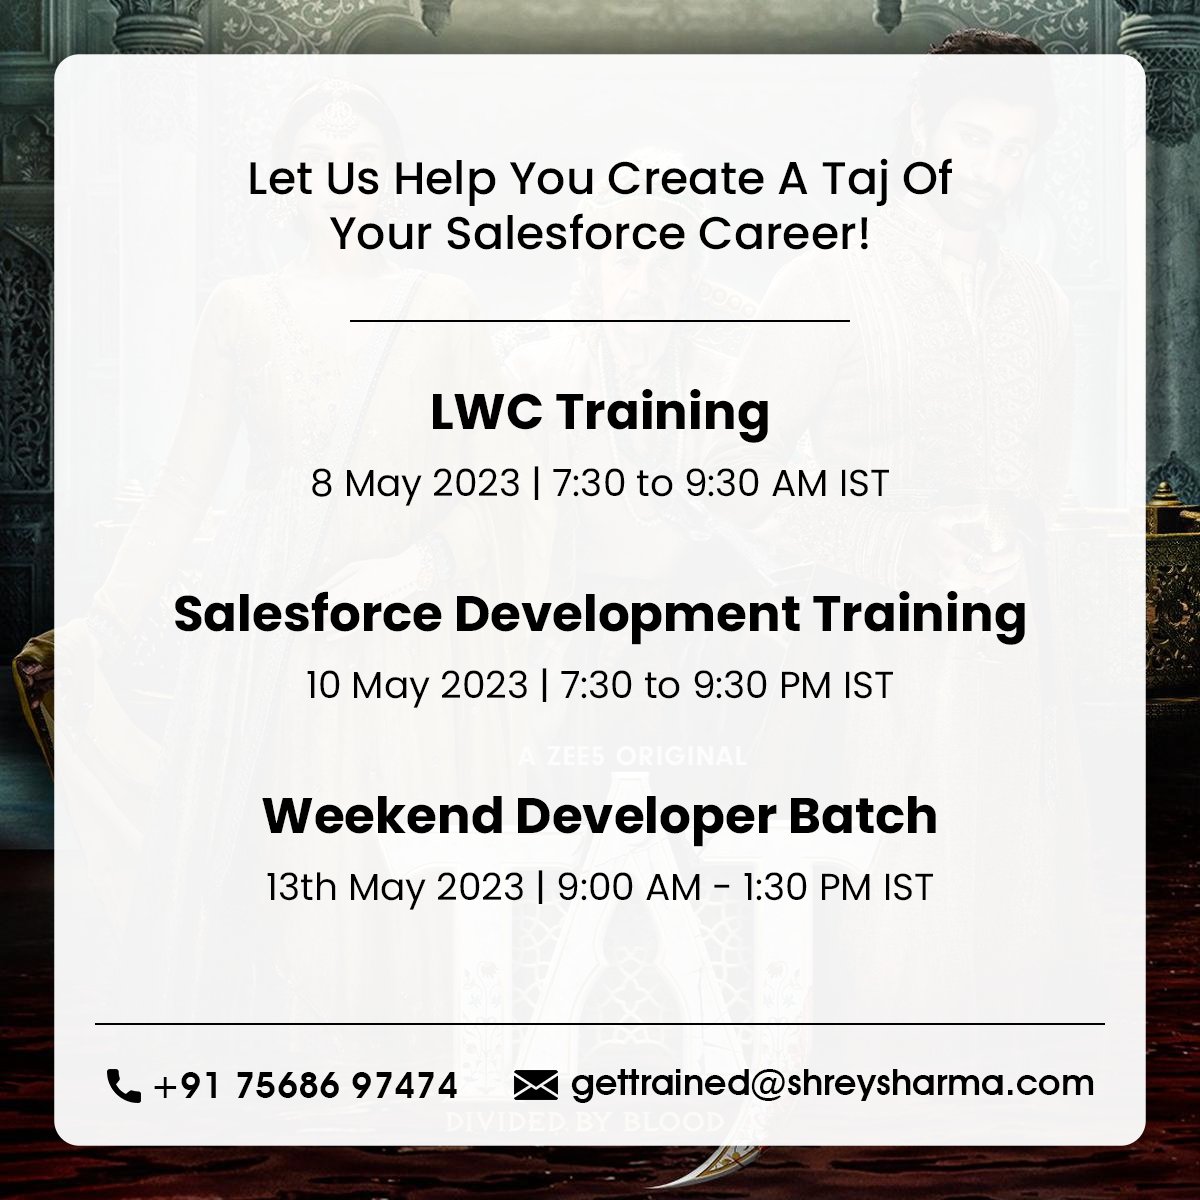 Get ready for all the exciting things coming your way this May! 🔥

Learn Salesforce and create a TAJ of your career. 👑
You can reach us at +91 7568697474.

#tajreignofrevenge #taj2 #zee5 #salesforcetraining #salesforcecourse #salesforcedevelopers #salesforcelightning